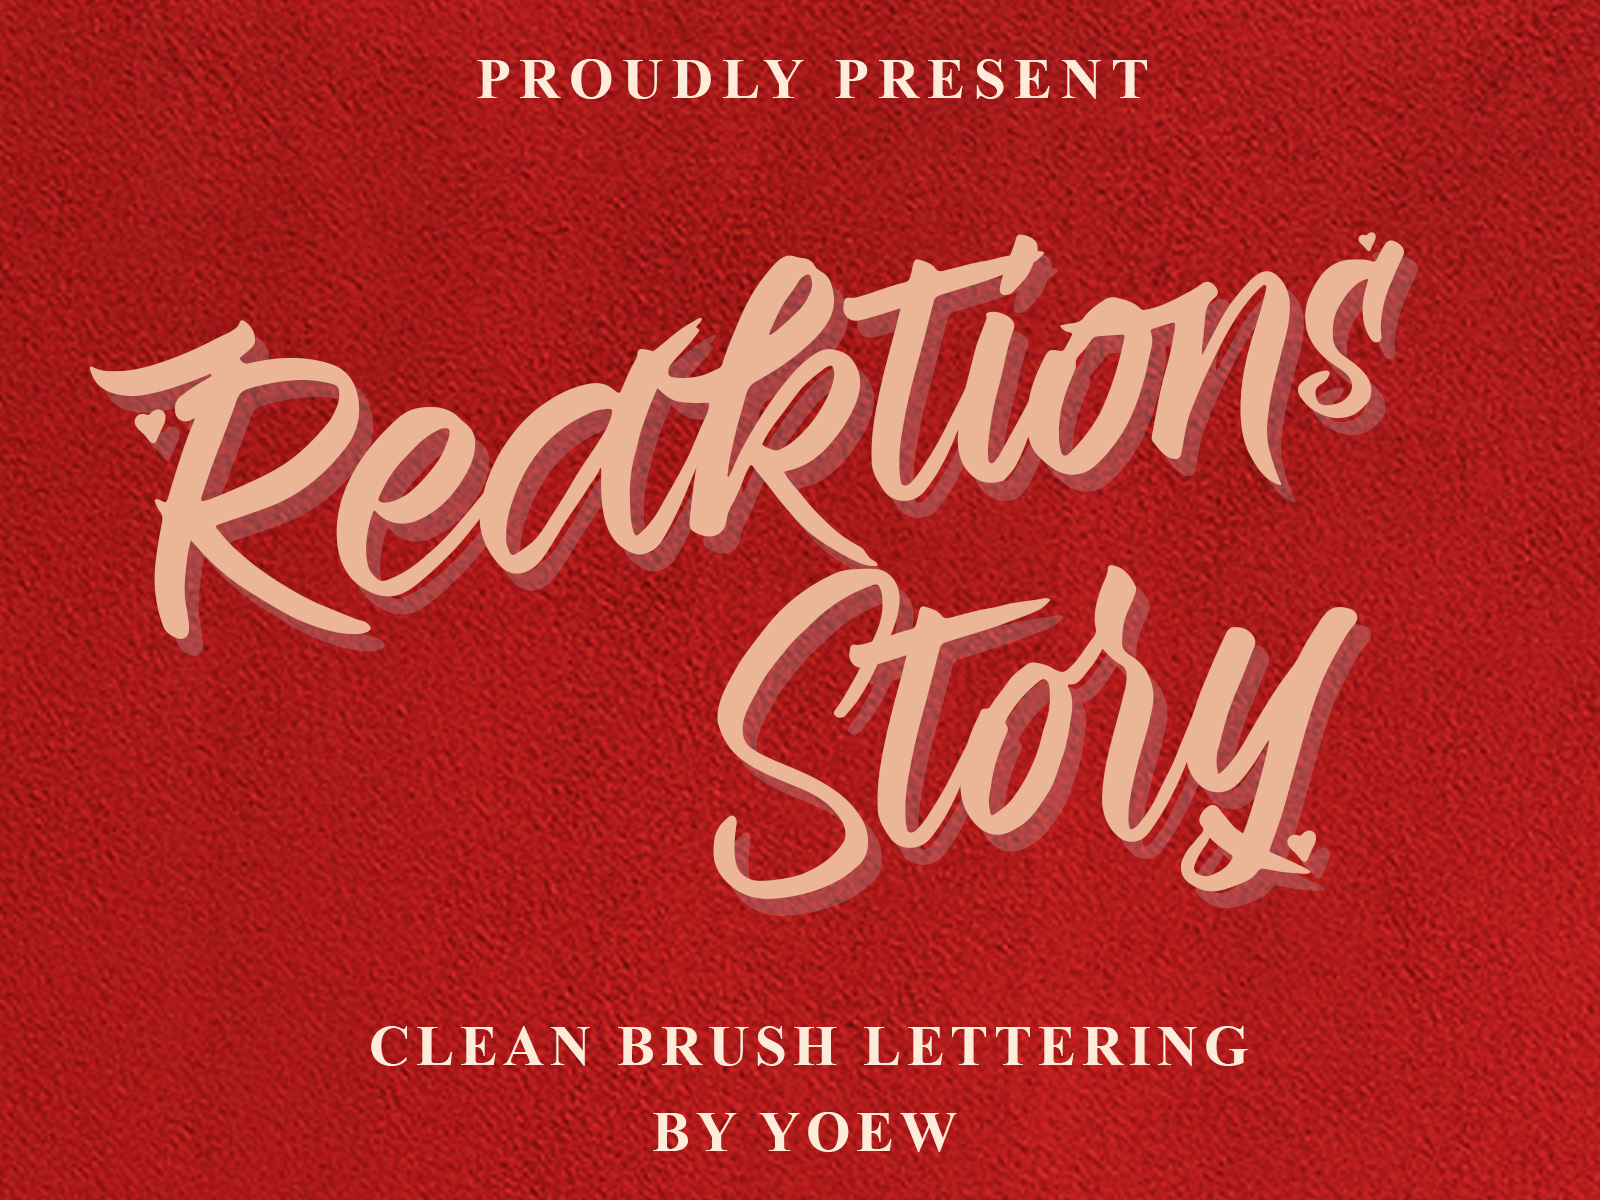 Reaktions Story